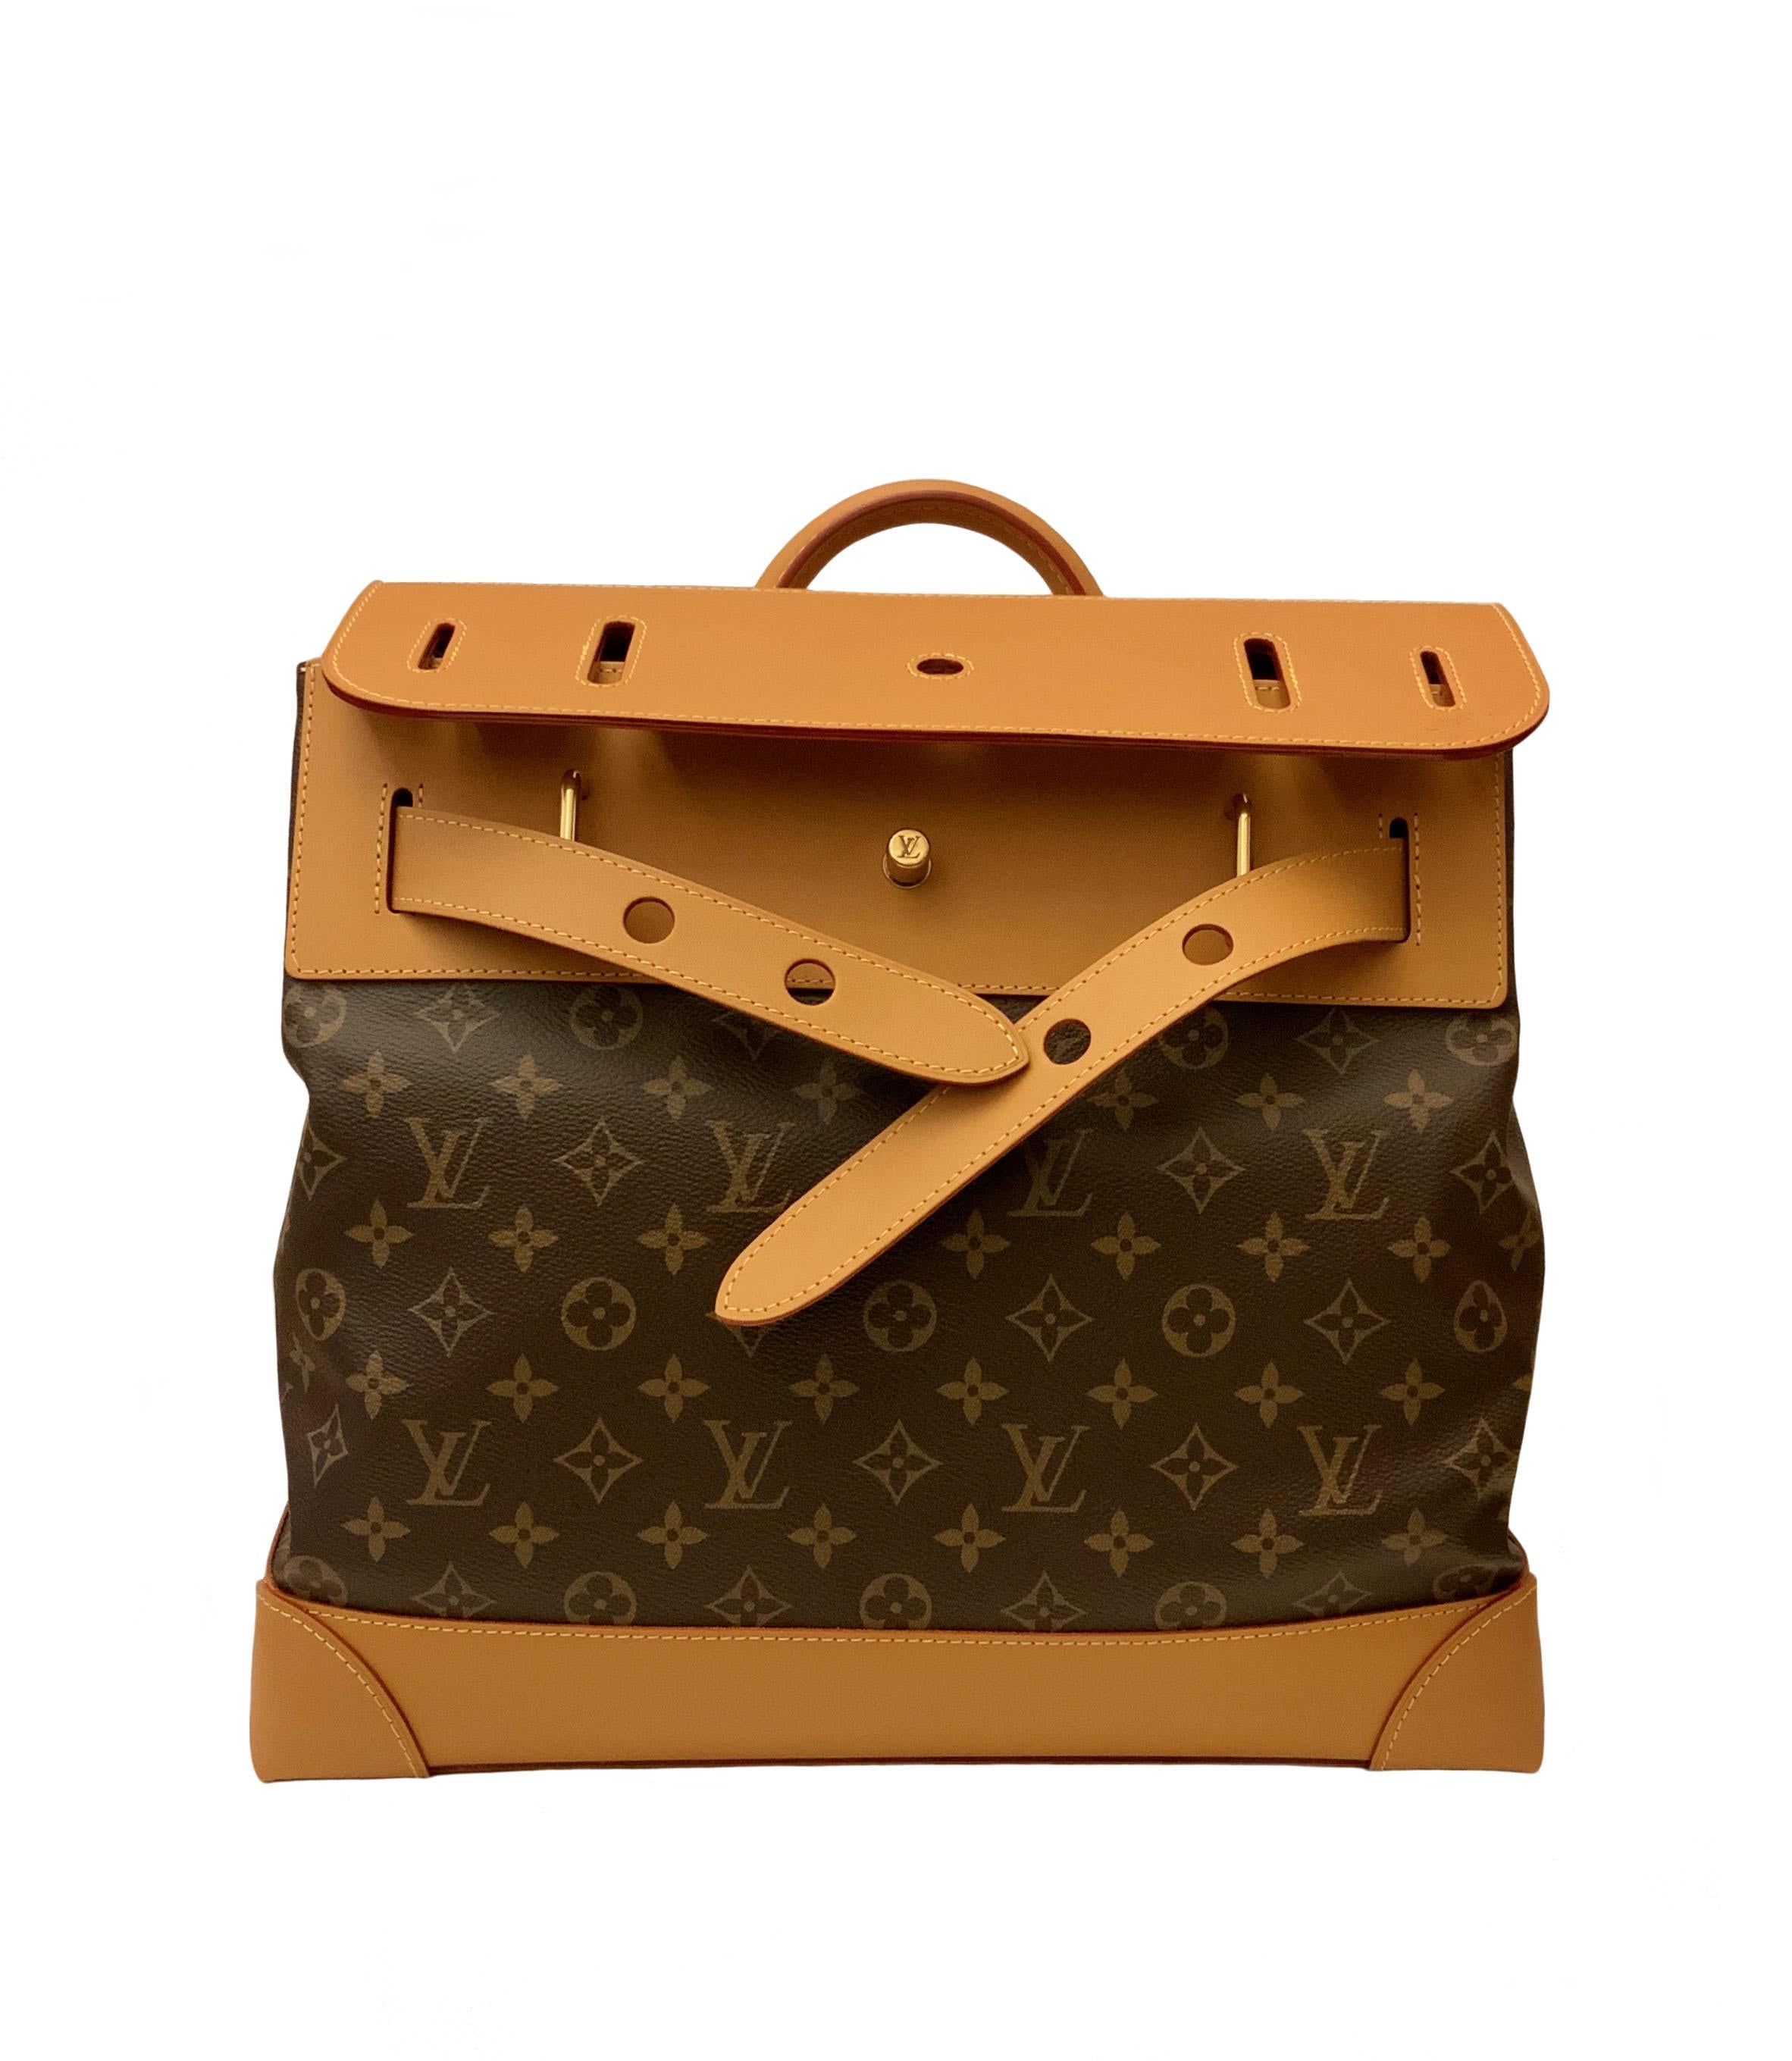 Created by Louis Vuitton in 1901, the Steamer has been redesigned by Virgil Abloh. 
It features a gold-tone chain and a safety pin as a closure in the front.
It is crafted in the classic Monogram canvas and the trimmings are in natural cow-hide